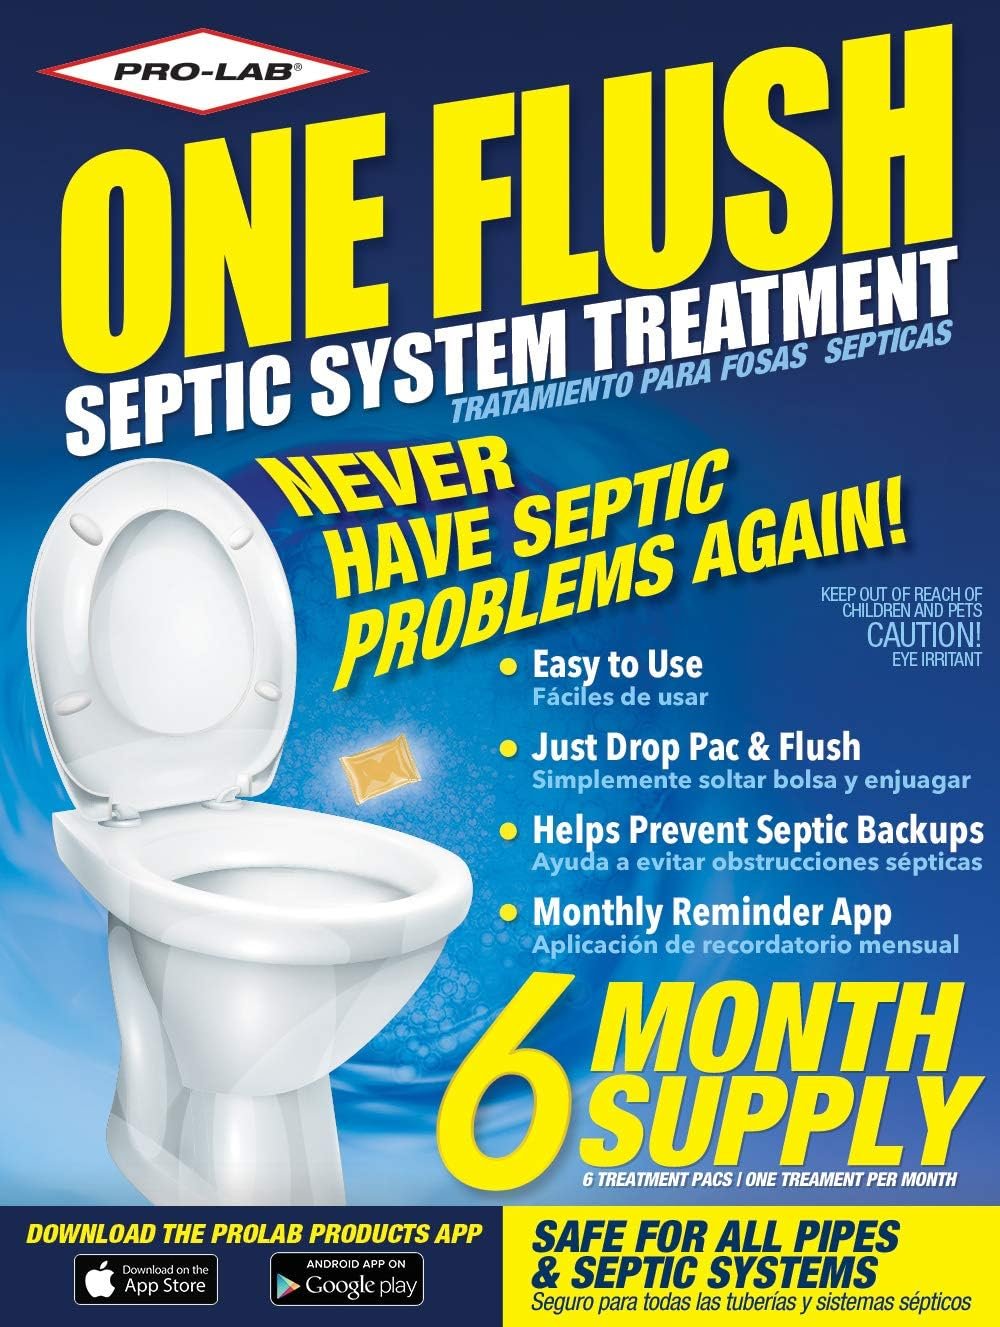 ONE FLUSH Month Supply of Septic Treatment, 6 Count